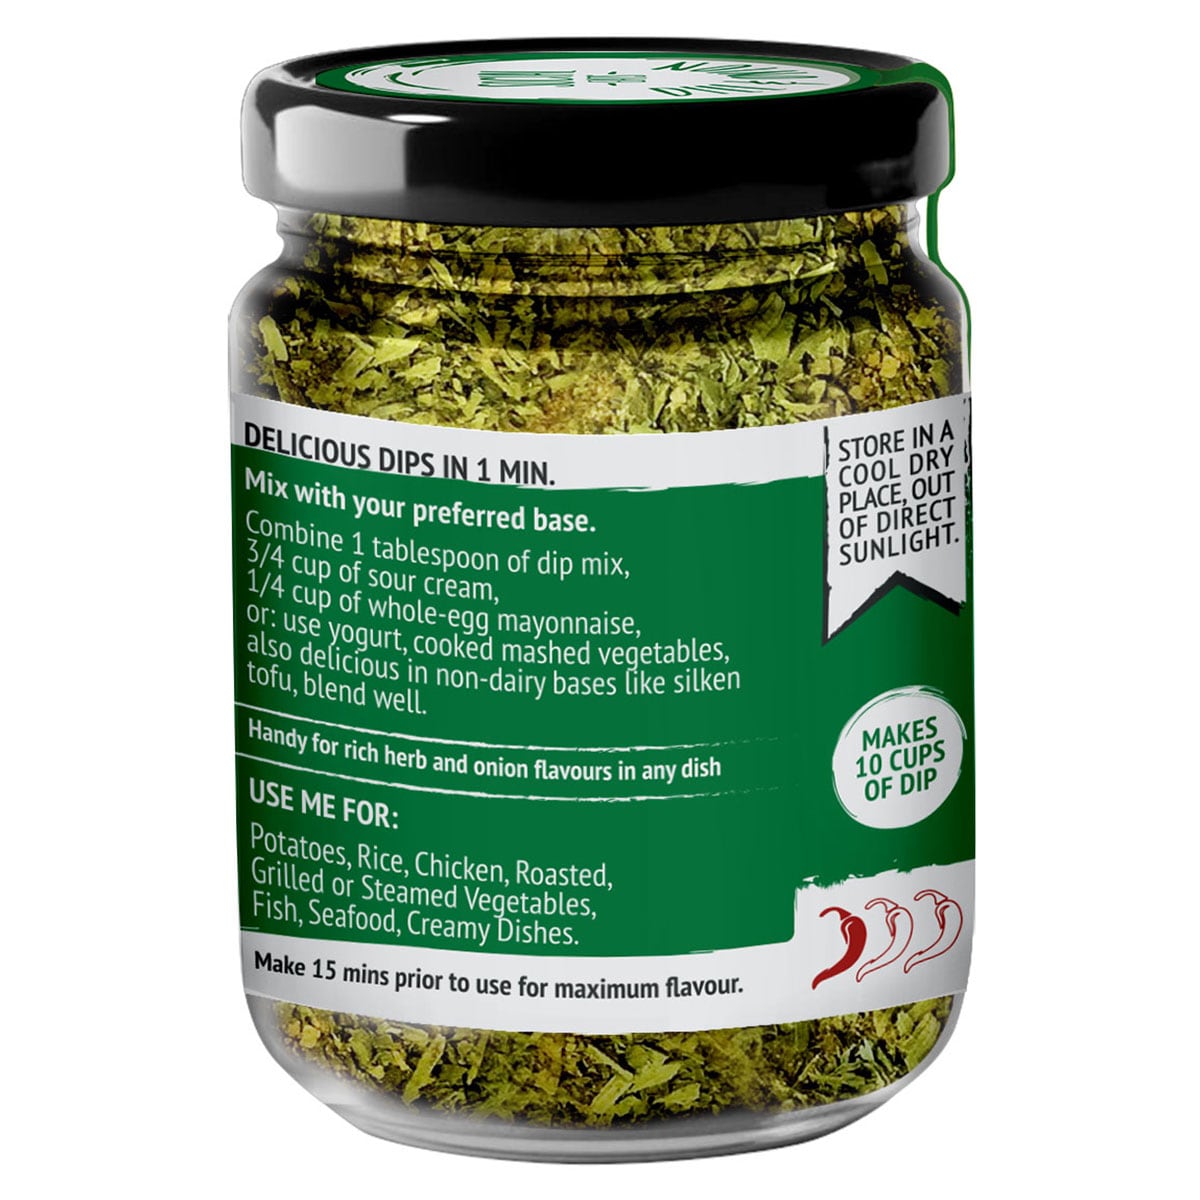 Social Eats Dill and Onion Dip Mix 70g